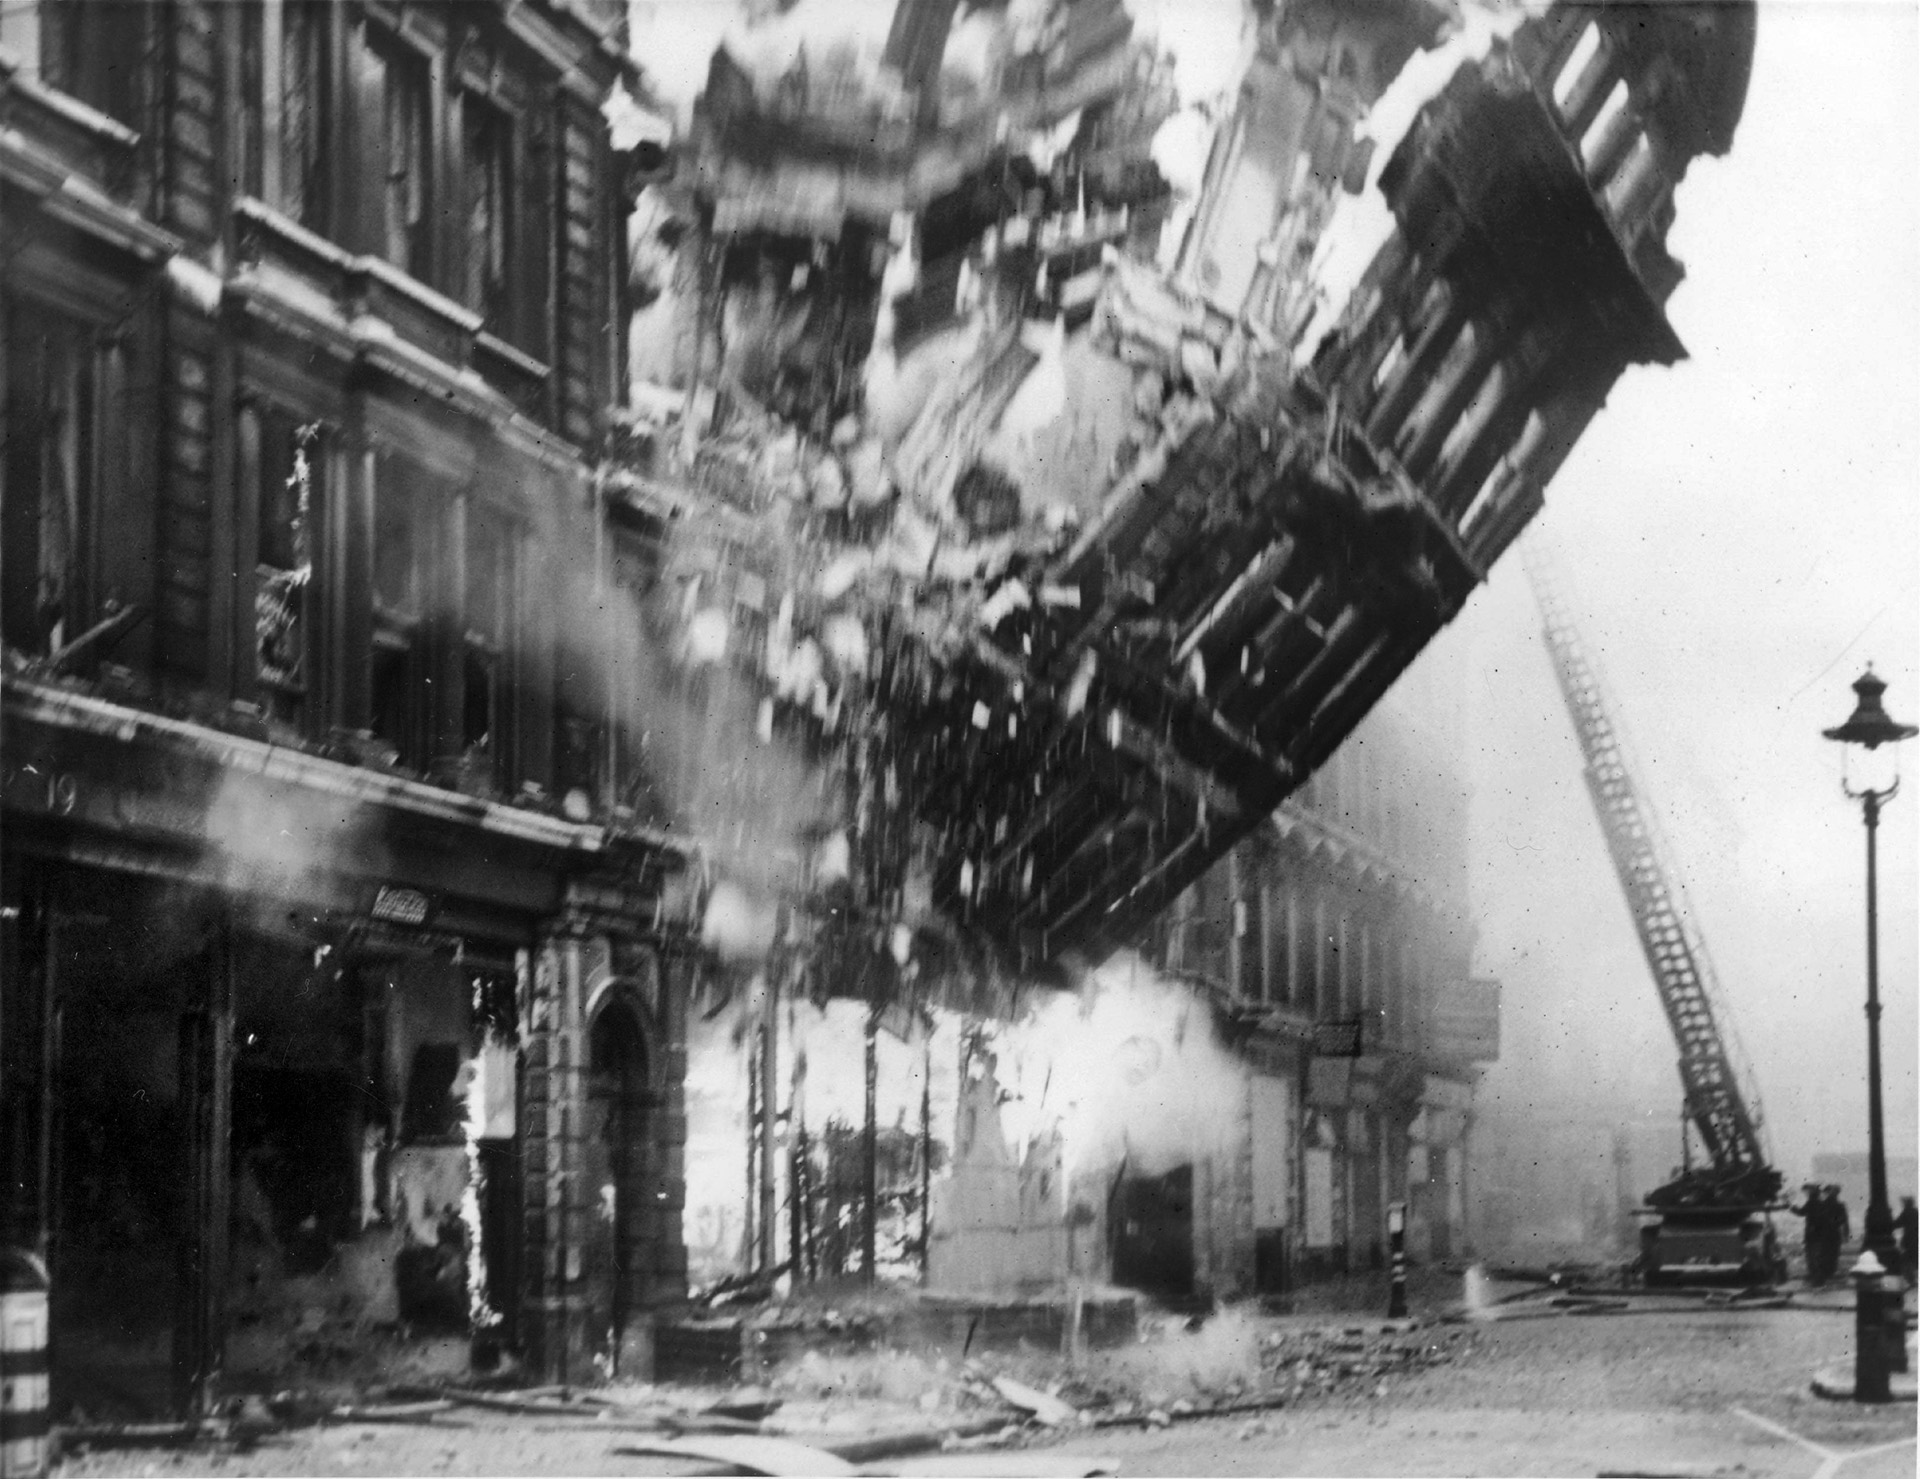 The façade of another building on Queen Victoria Street is captured in mid-collapse in this startling image. German incendiary bombs had burned the heart out of the structure, and weakened it so that the exterior toppled in spectacular fashion while firefighters watched from nearby.